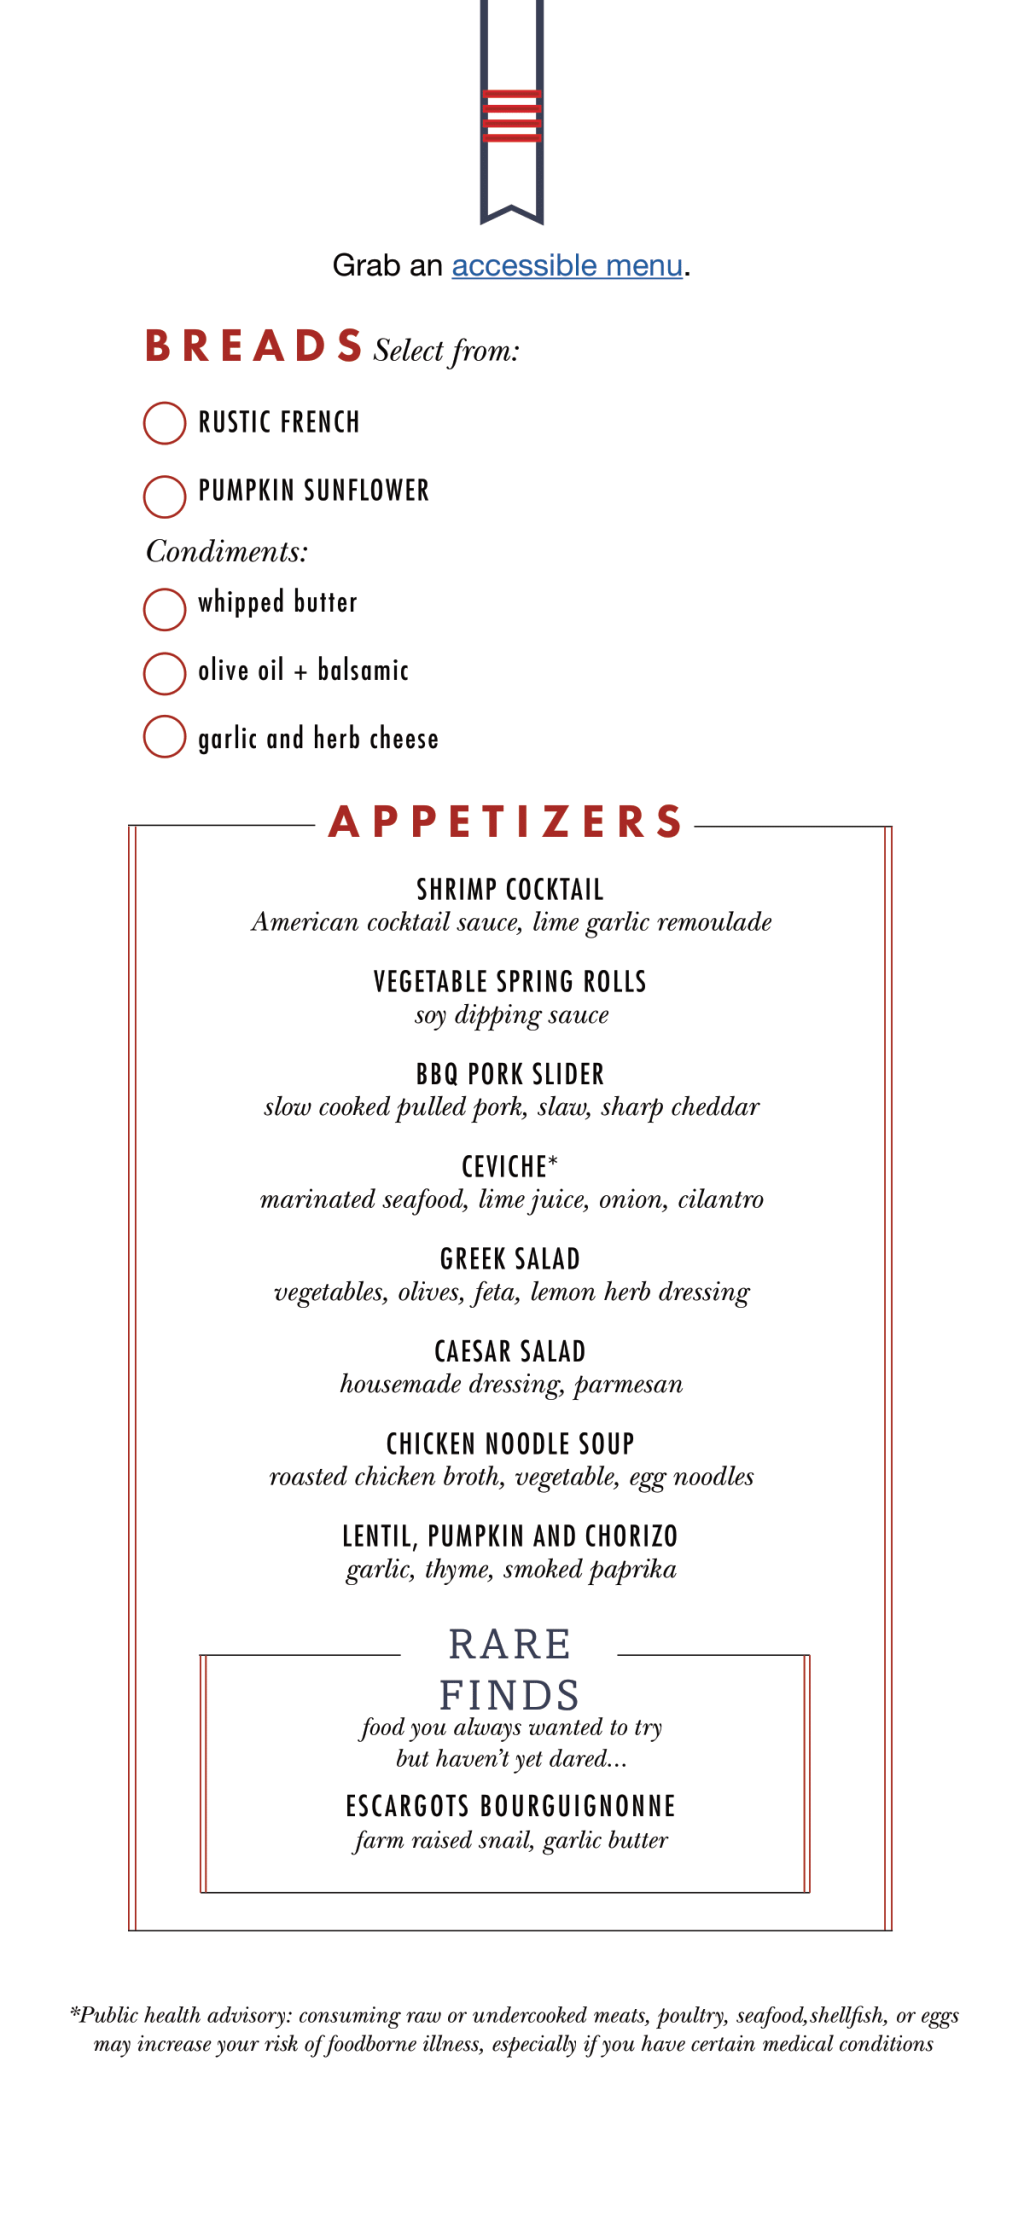 Picture of: Carnival Cruise Menus